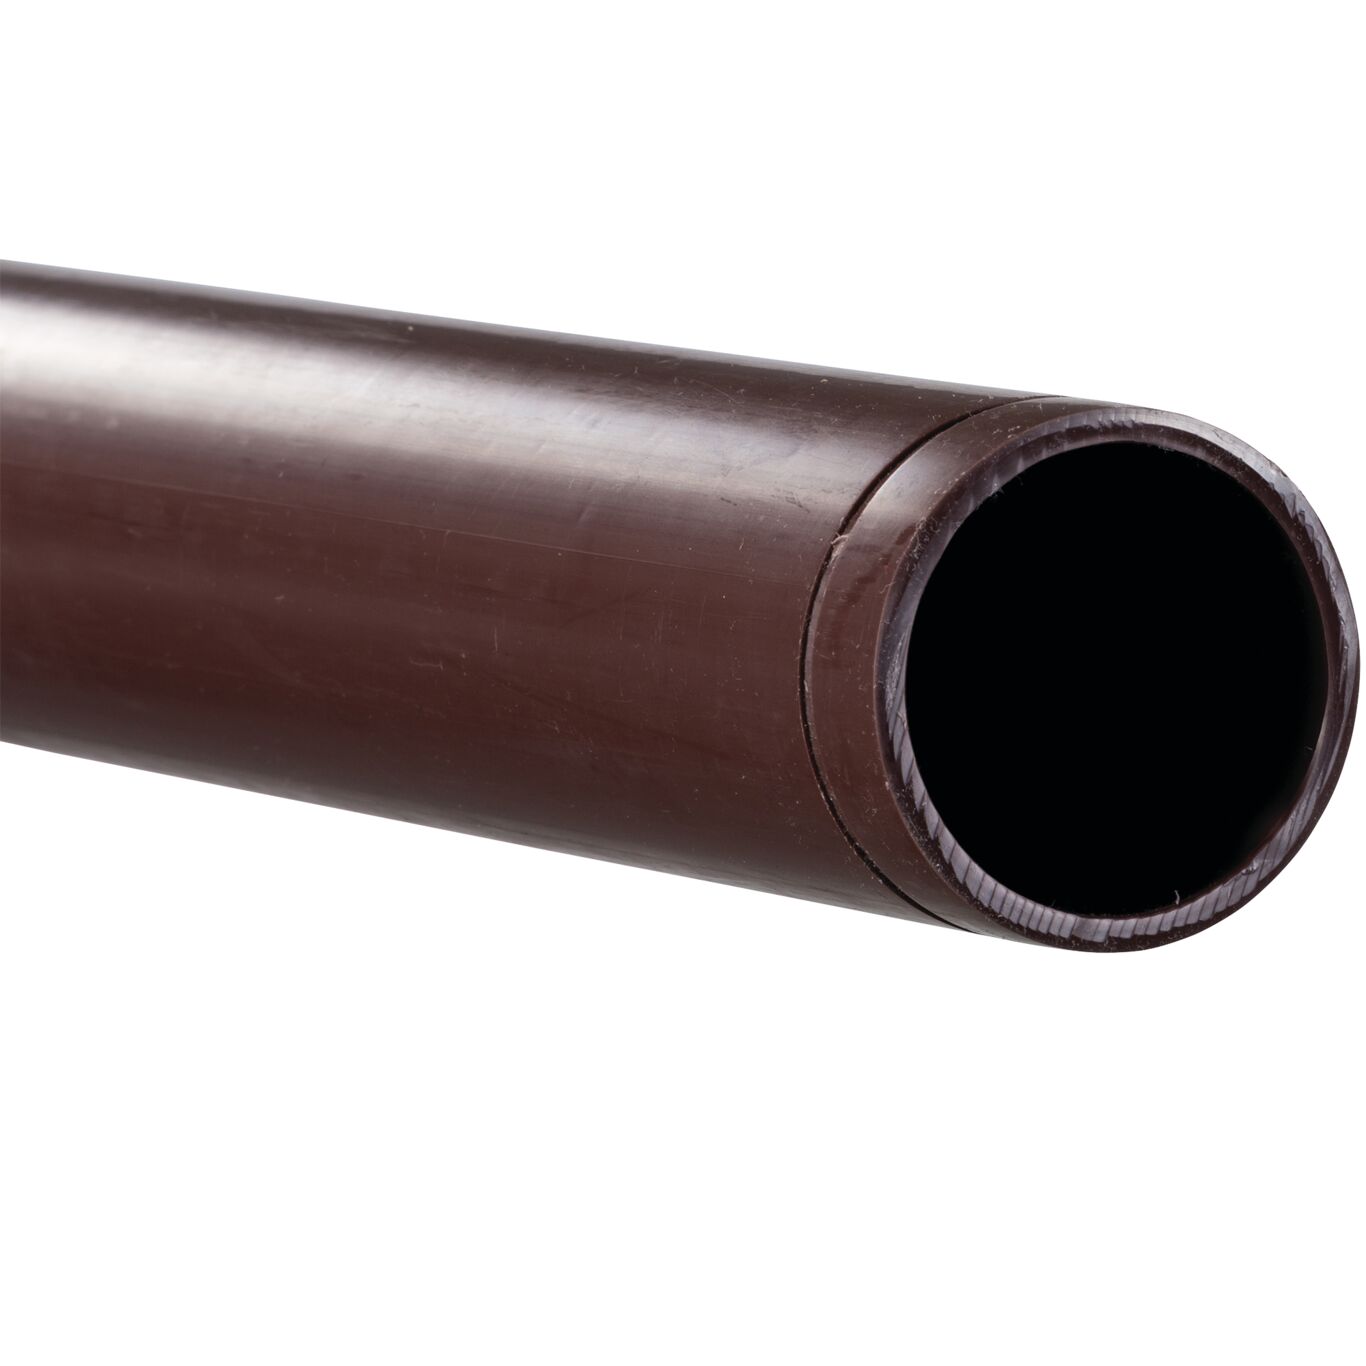 Product Image - Piping Brownline PP SCH 40, Piping Brownline PP SCH 80